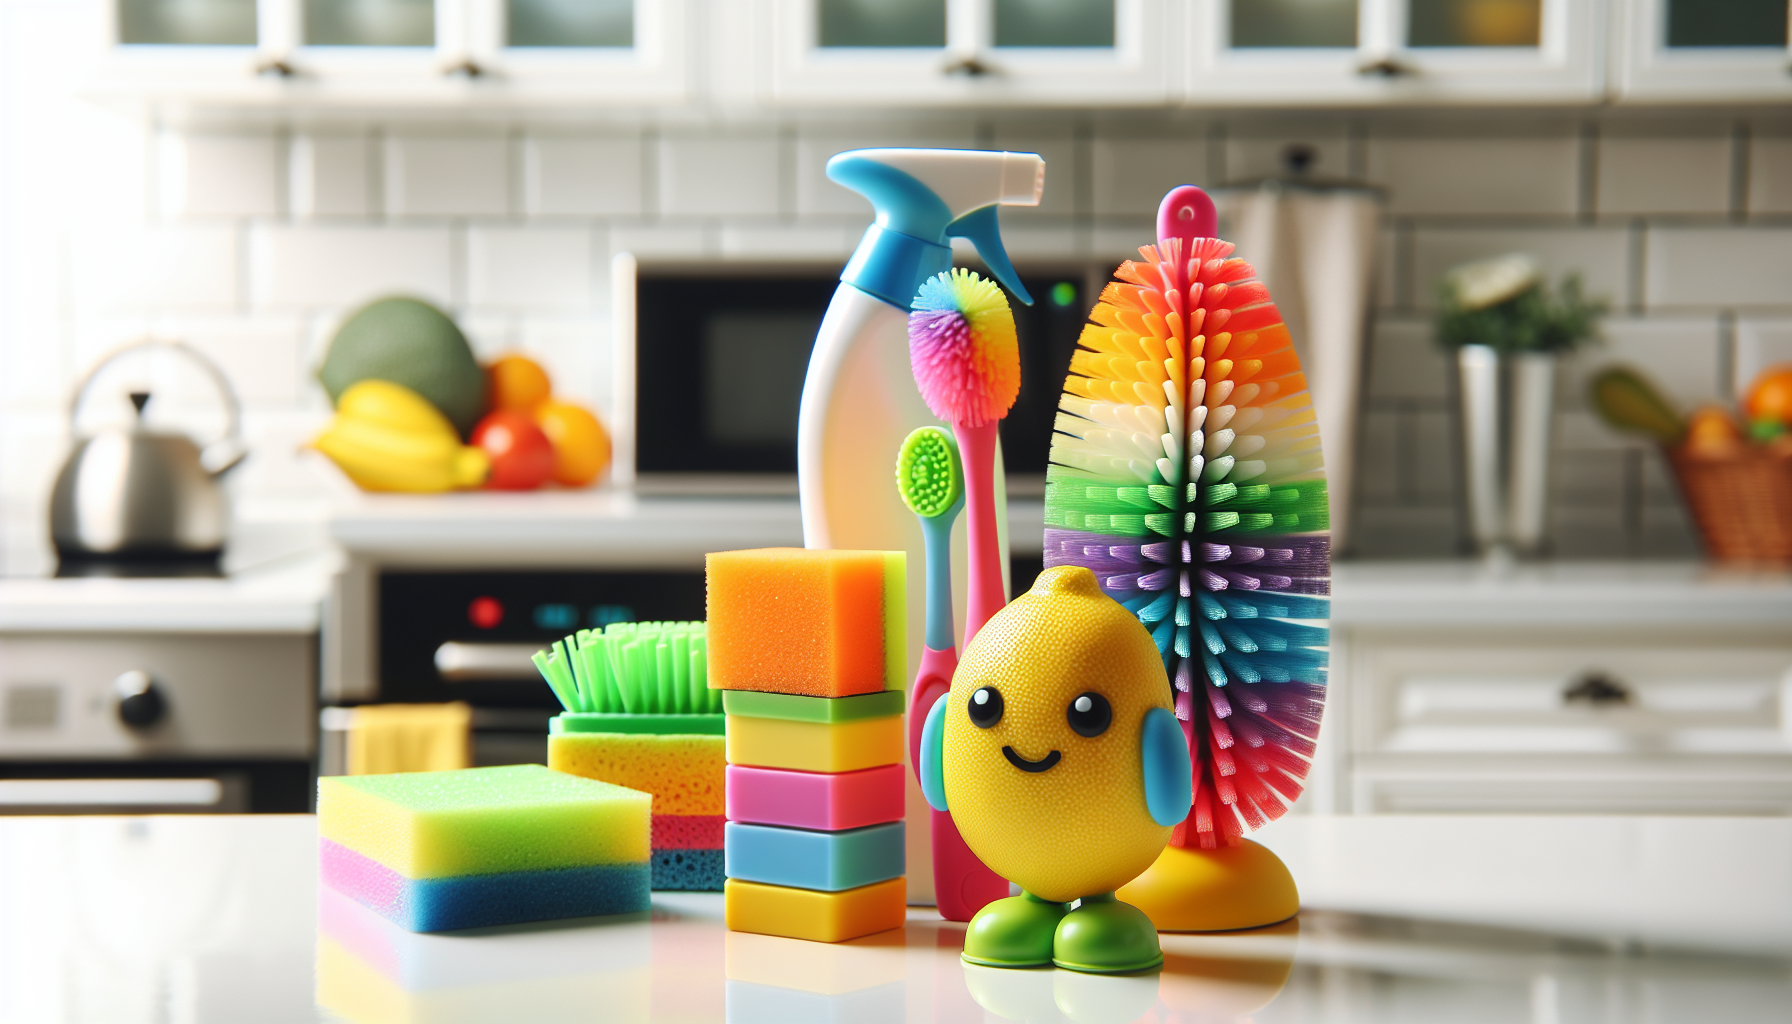 Kitchen cleaning companions including microwave cleaner and scrubber